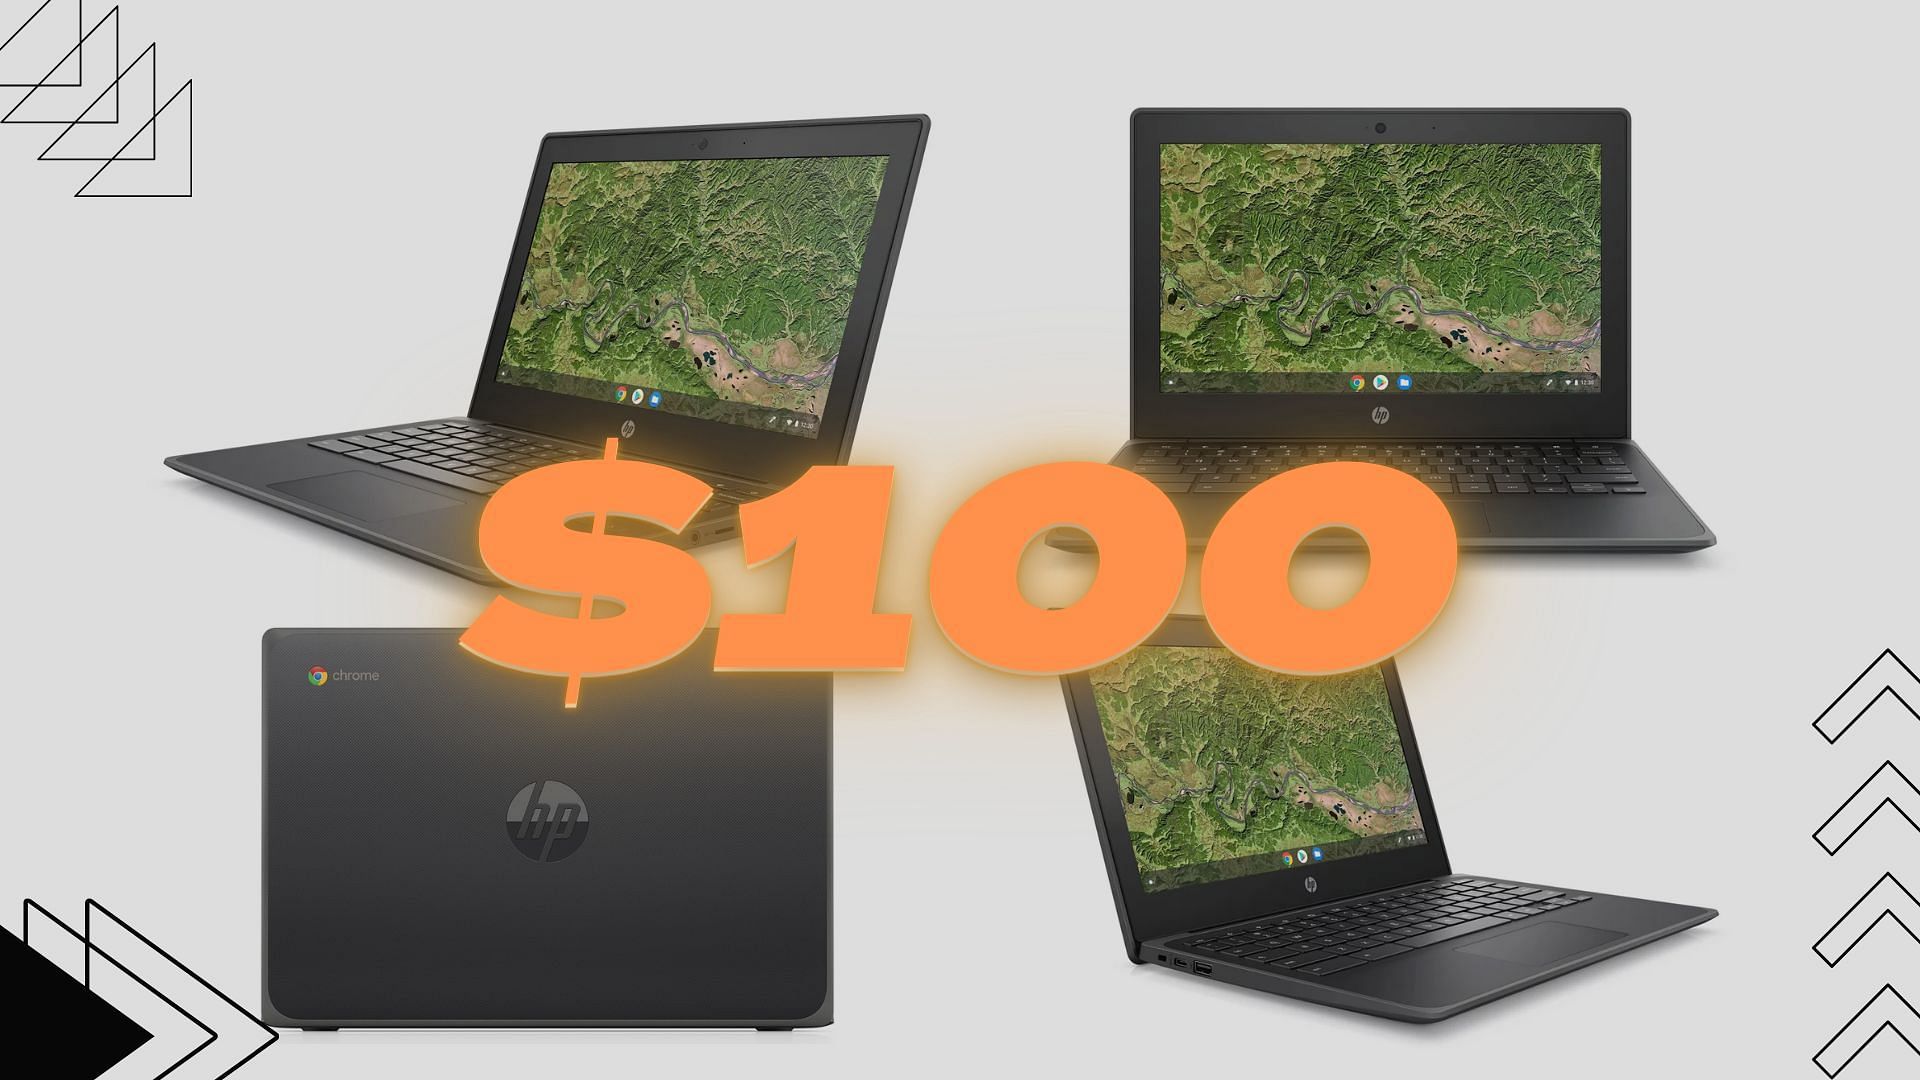 The HP Chromebook that is currently available for under $100 (Image via Sportskeeda)